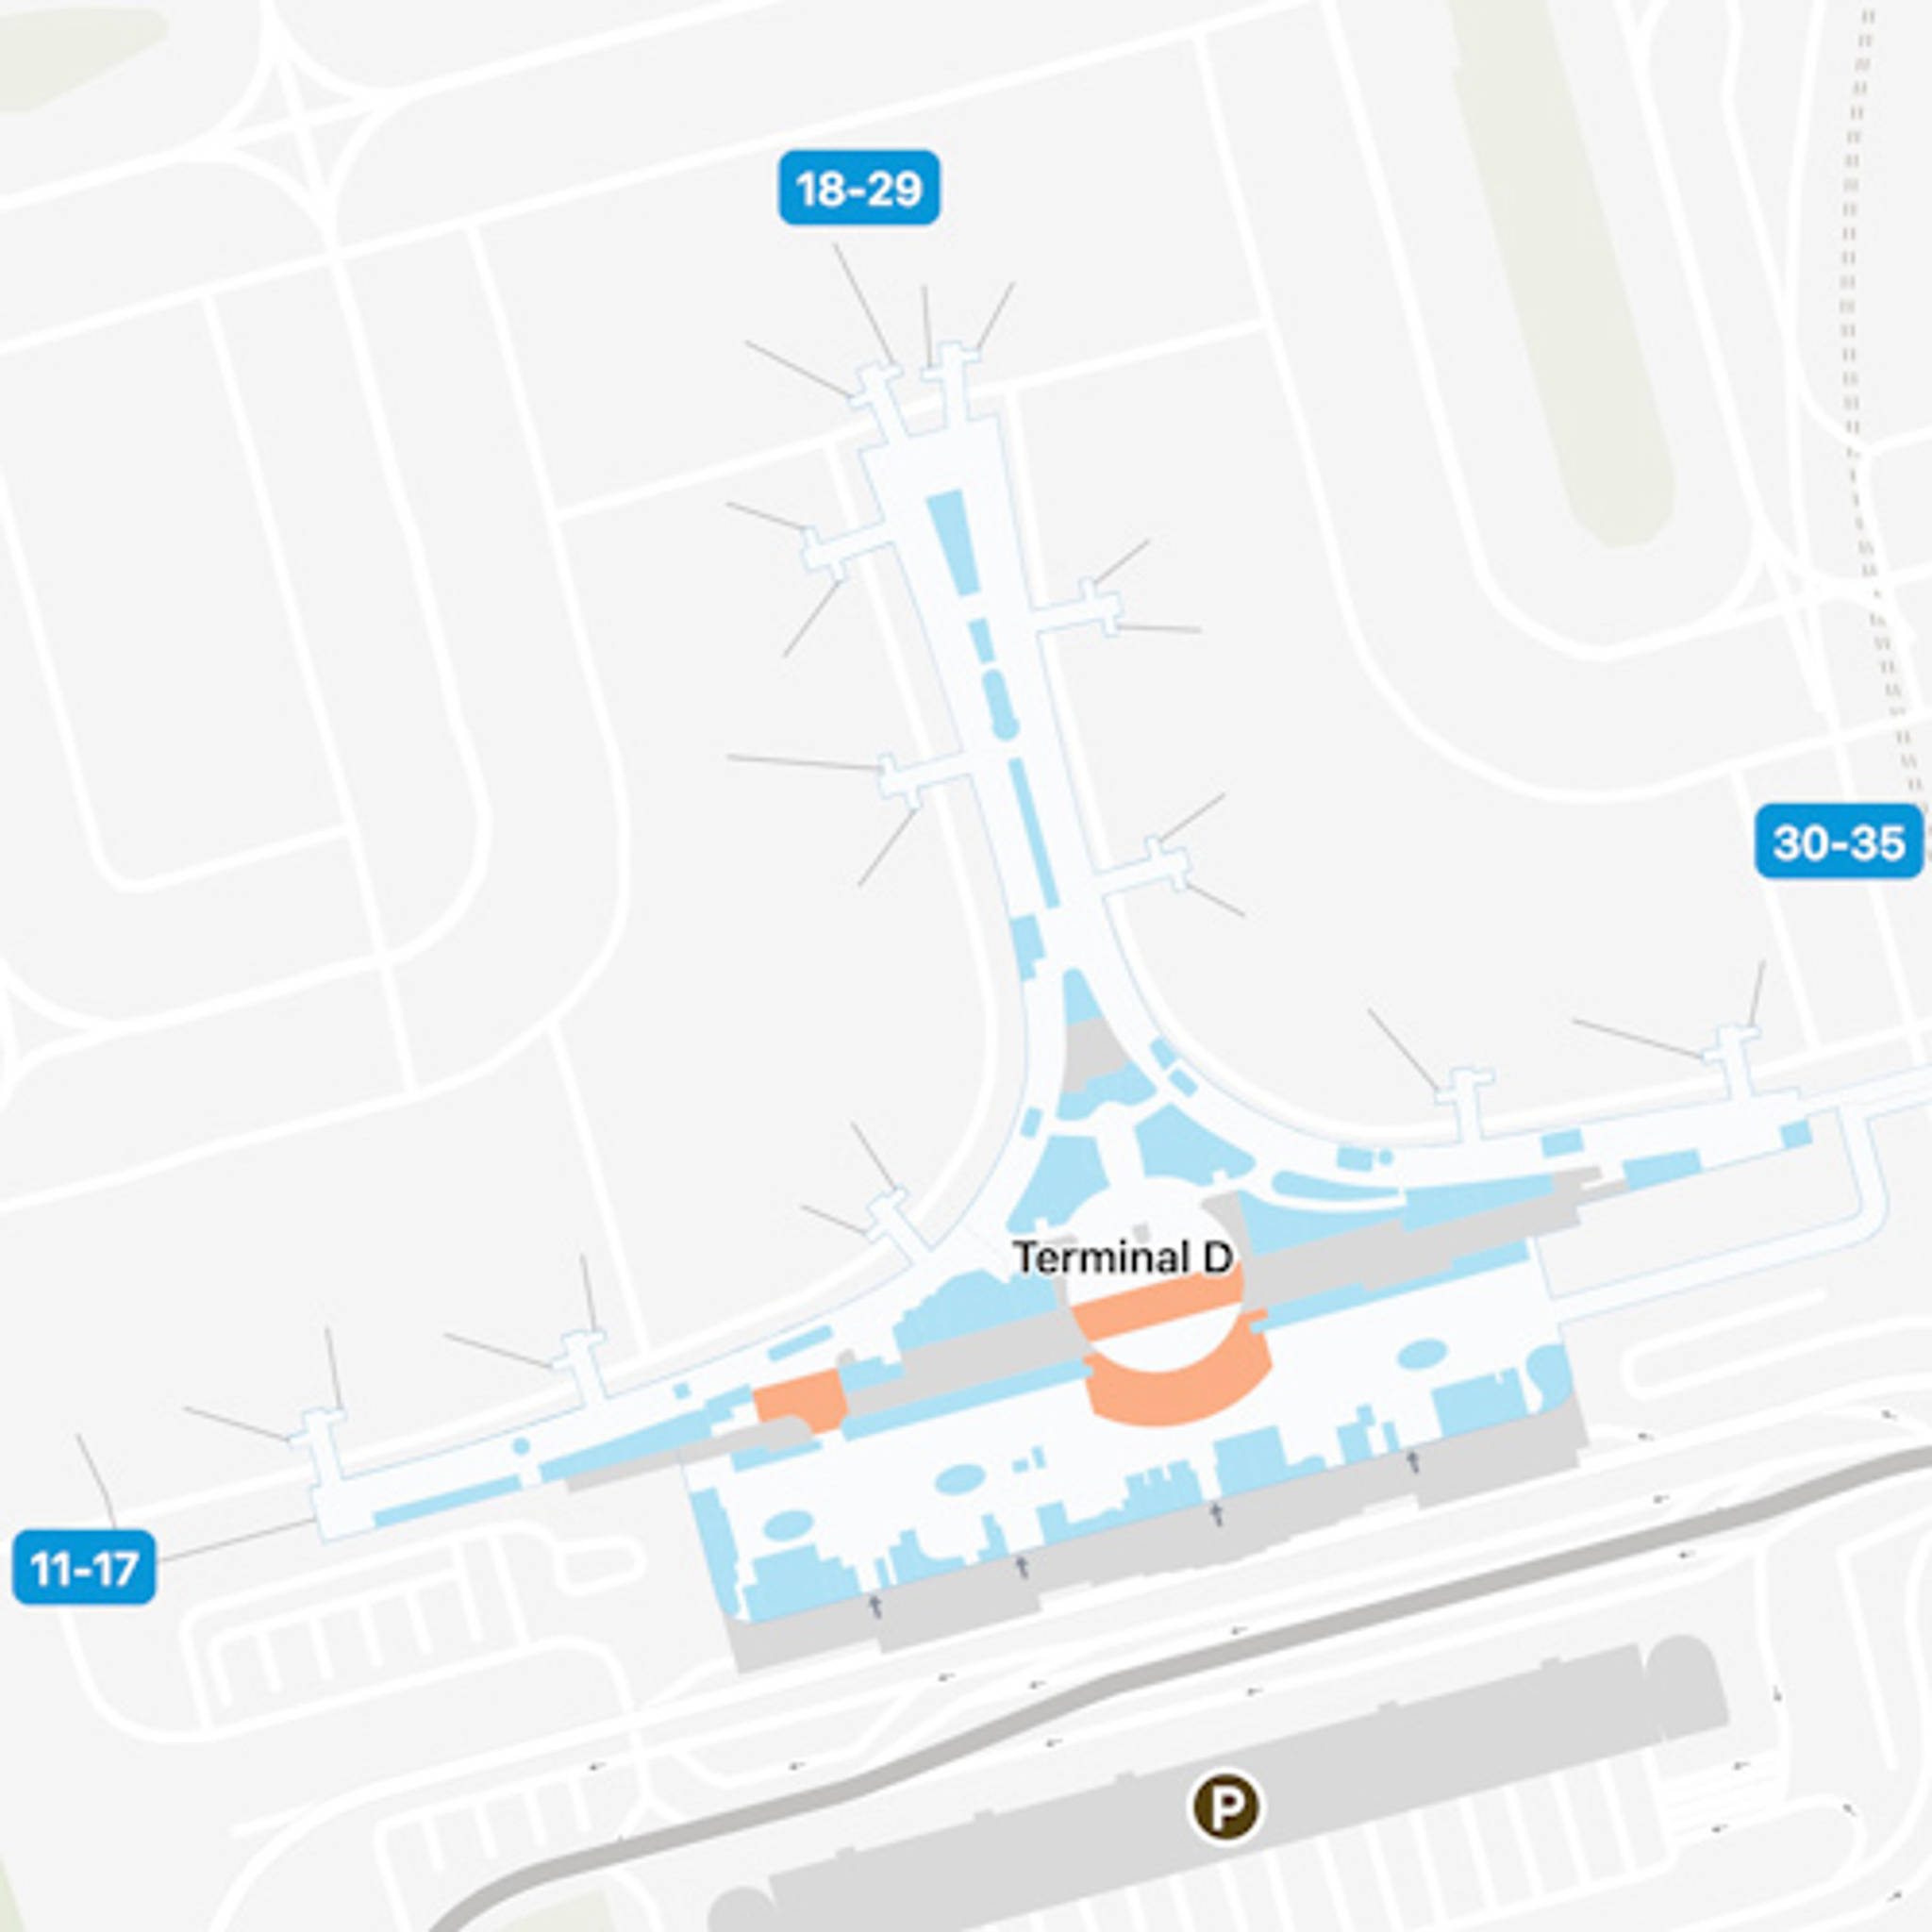 Moscow Sheremetyevo Airport SVO Terminal D Map